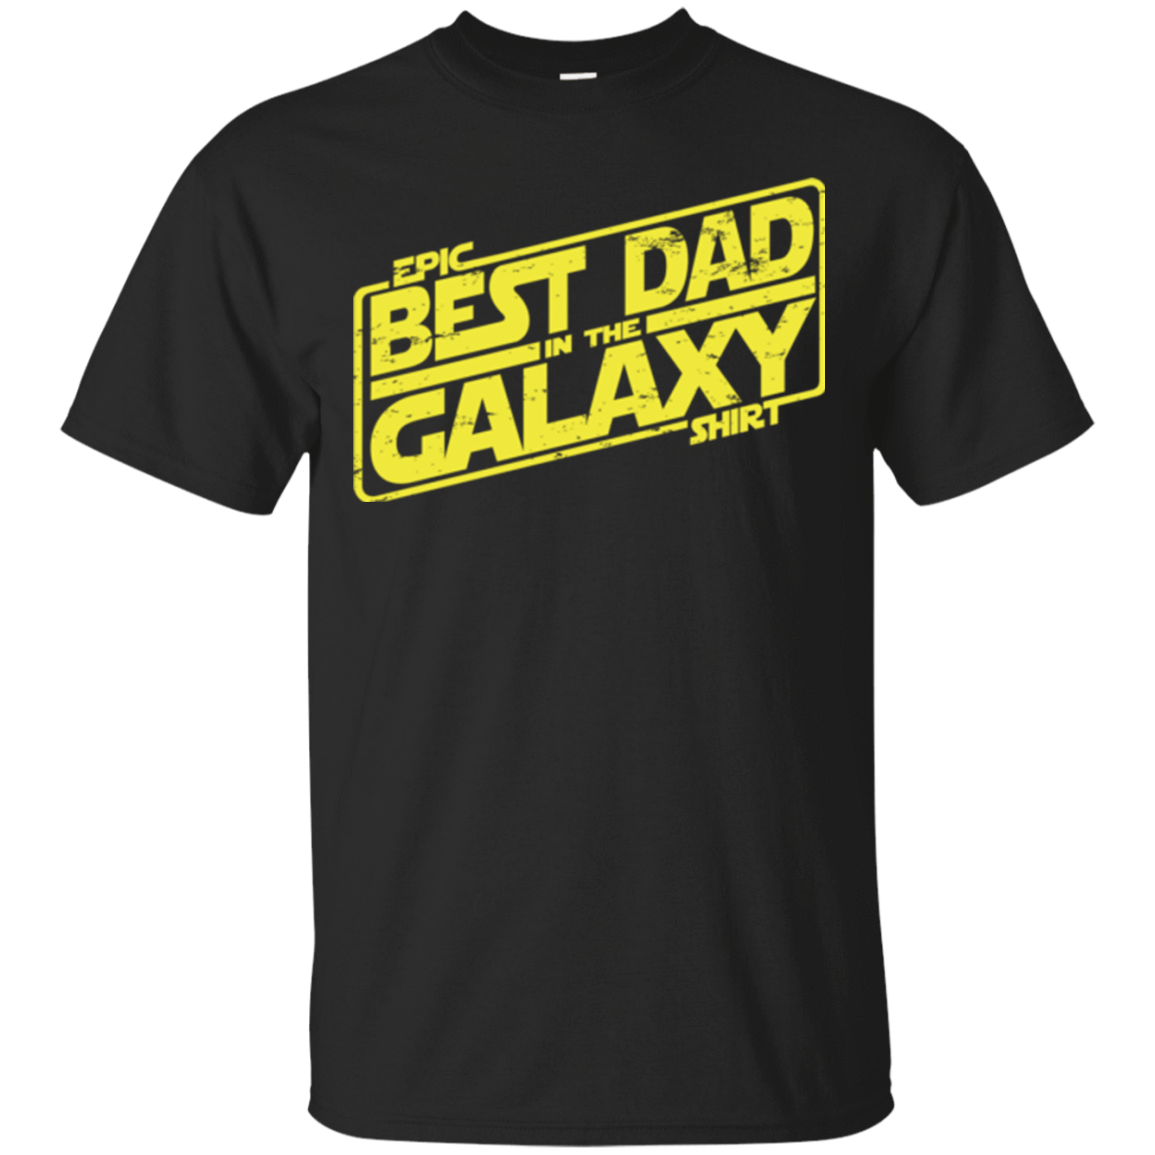 T-Shirts Black / Small Best Dad in the Galaxy T-Shirt